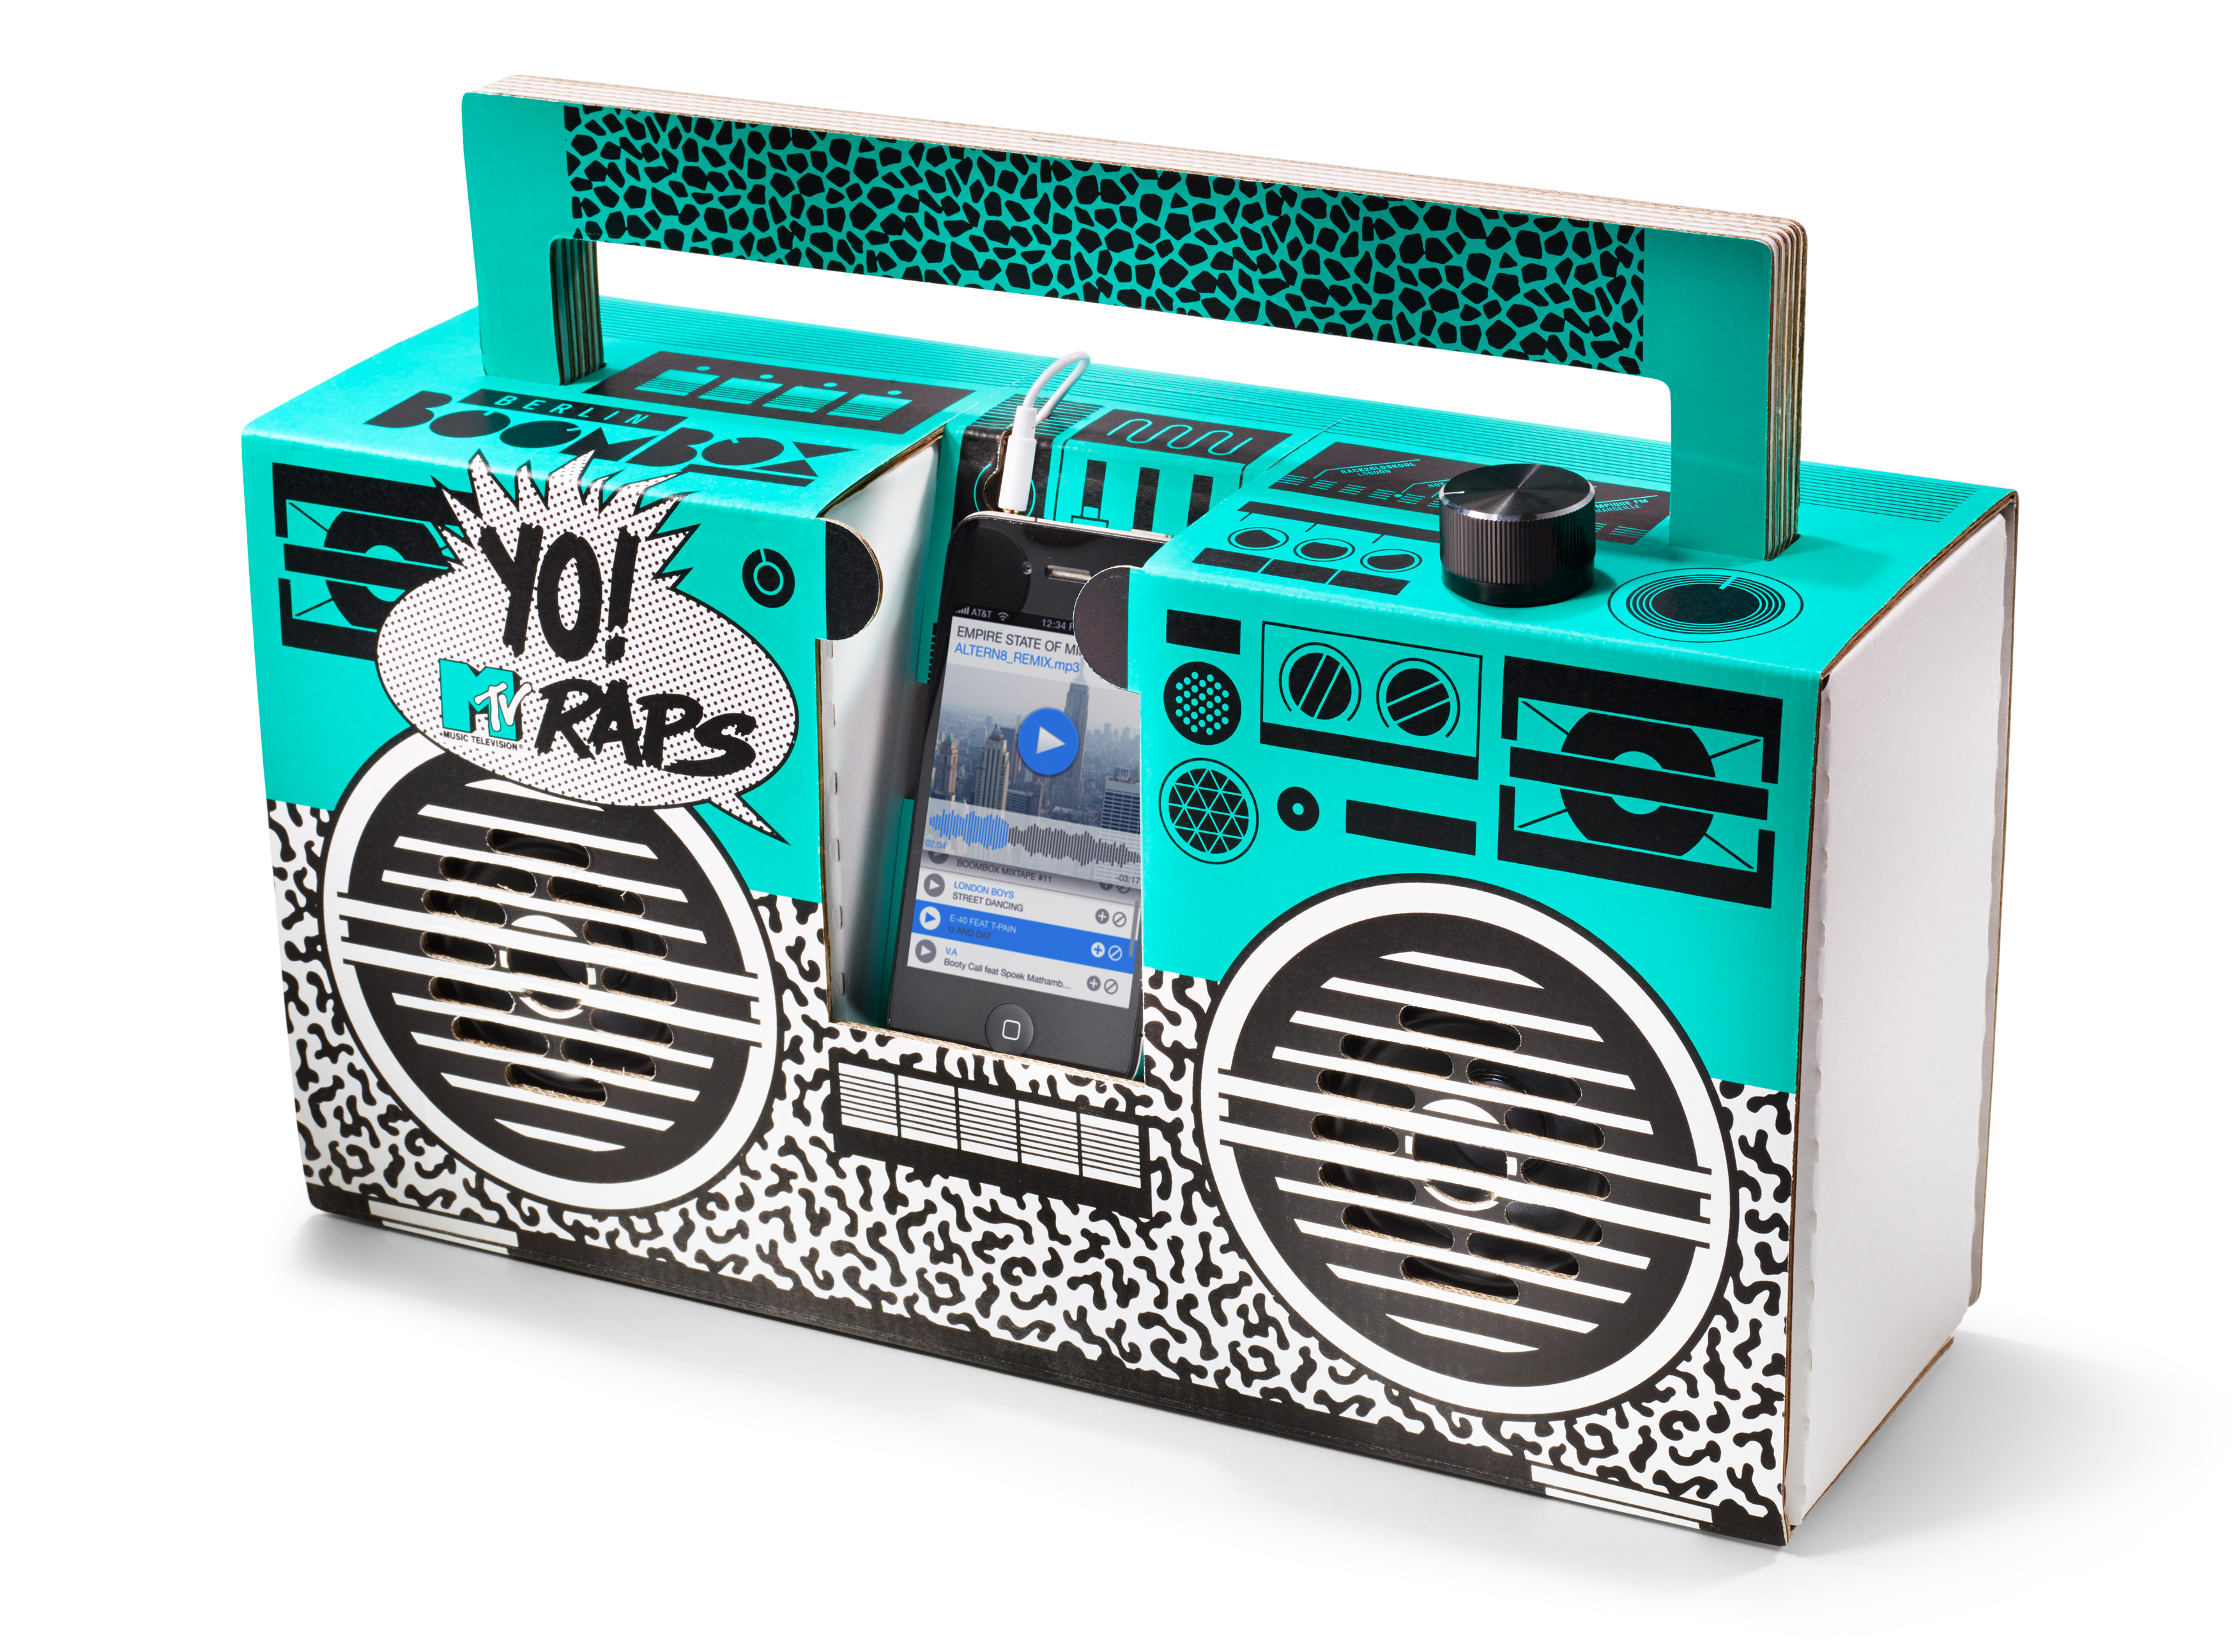 Lethal company mods boombox